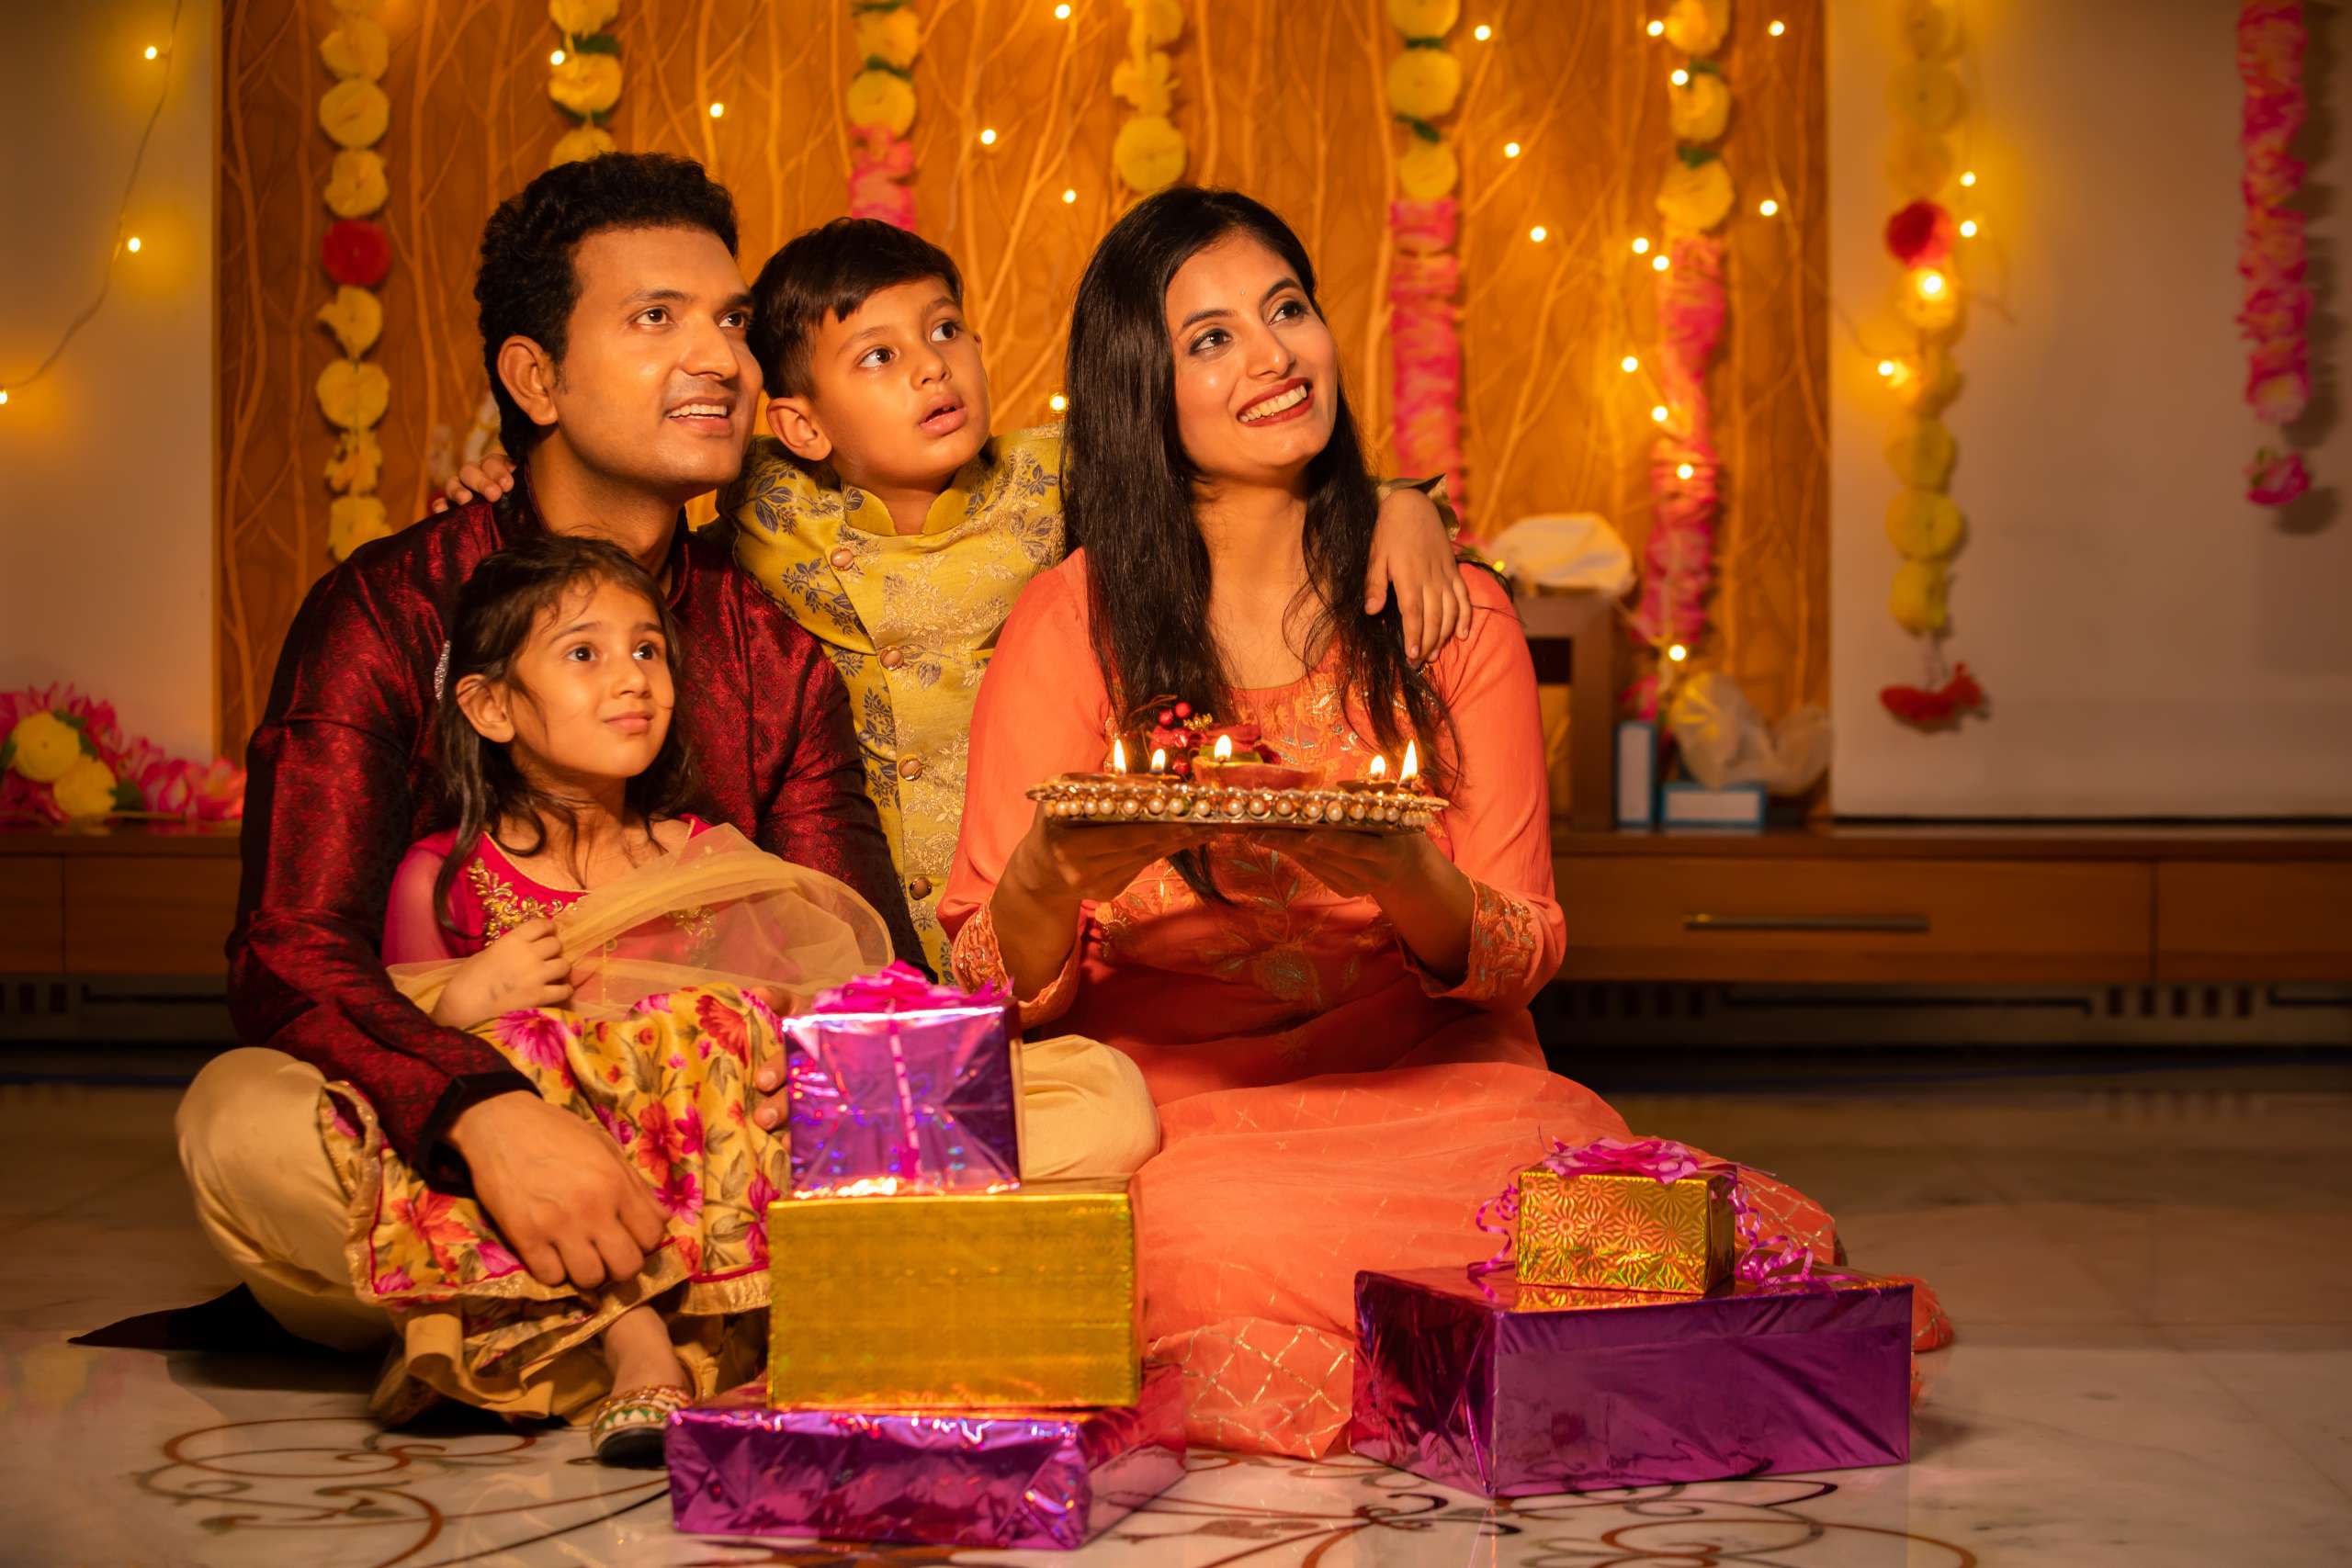 Happy young Indian family in traditional dress with lots of gifts around sitting on floor celebrating diwali festival at home.